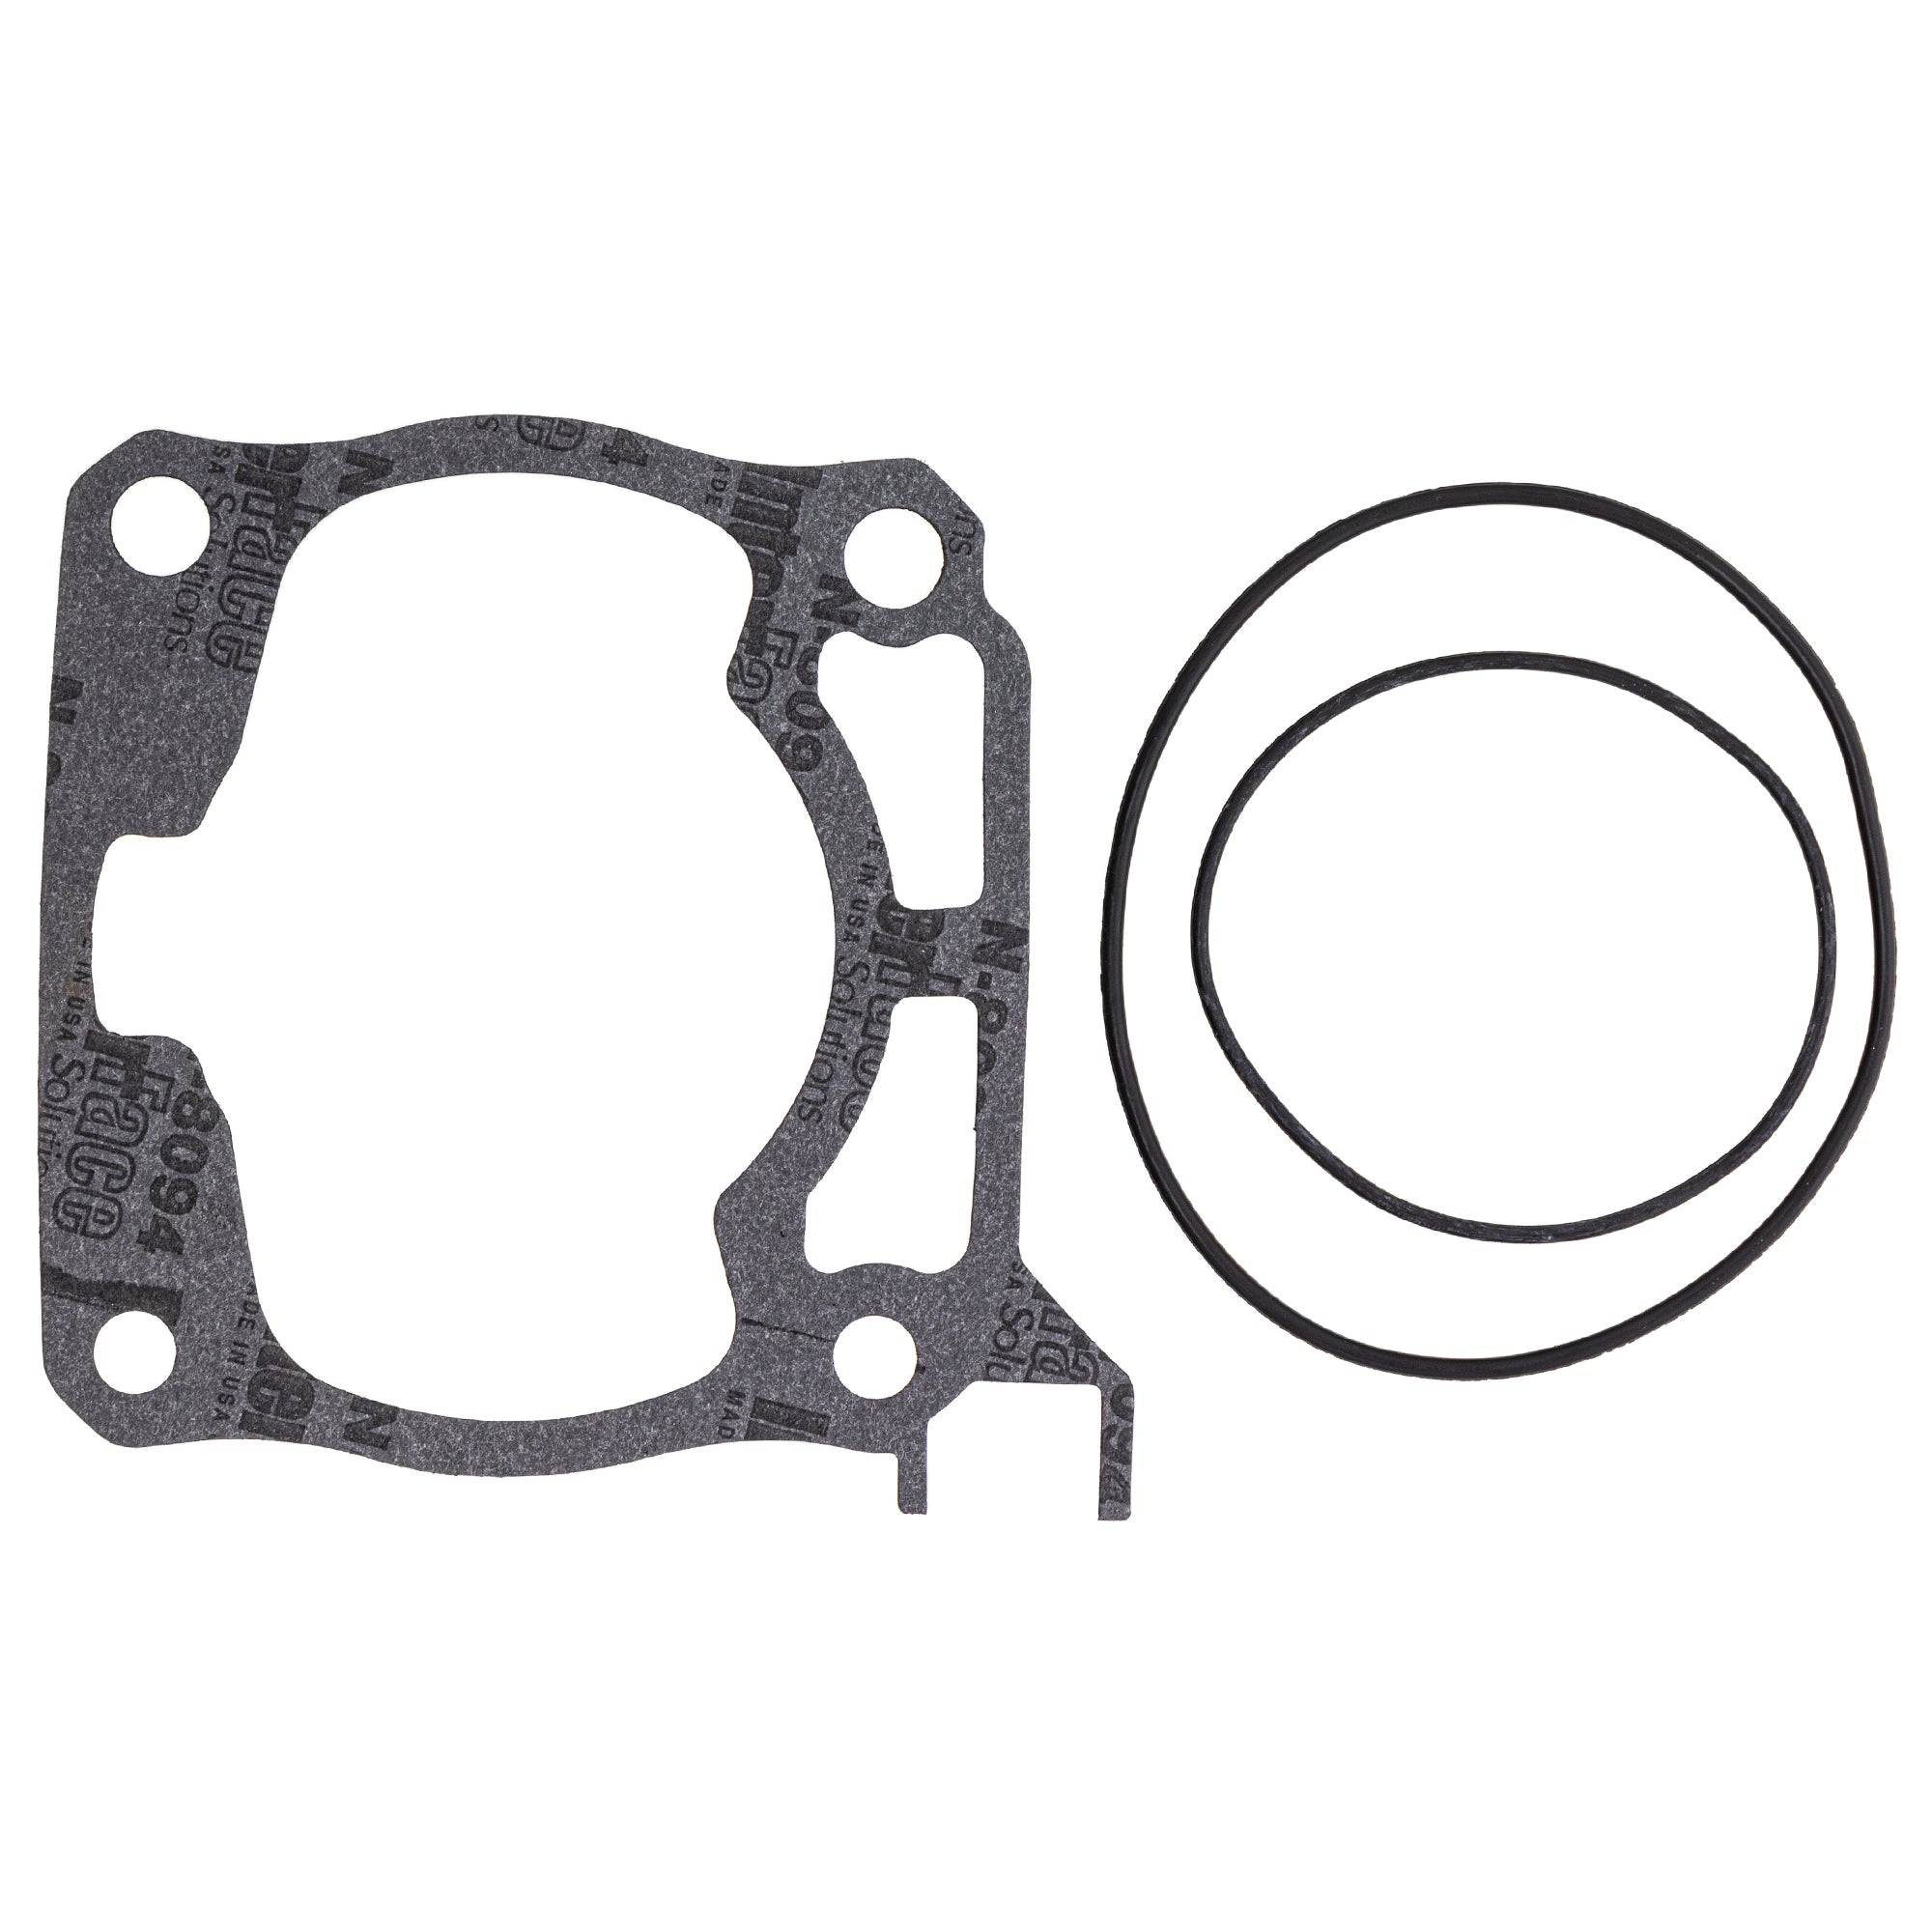 Base Gasket and O-Ring Kit for Yamaha YZ125 93210-90785-00 93210-63442-00 1C3-11351-00-00 NICHE 519-KGS2249K